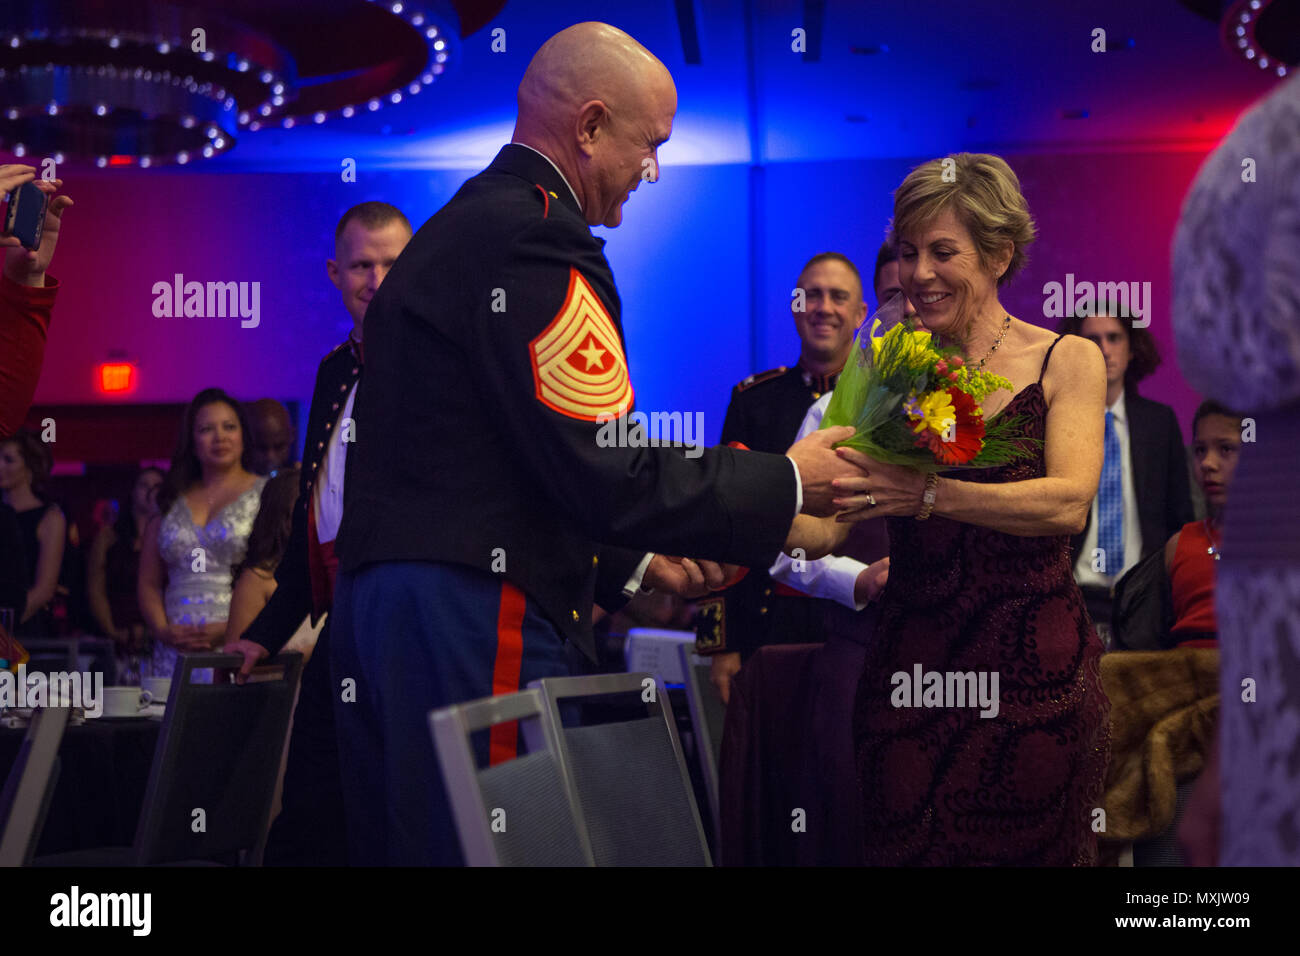 Denise Glynn, wife of U.S. Marine Corps Brig. Gen. James F. Glynn, director, Office of United State Marine Corps Communication, receives flowers from Sgt. Maj. Robert W. Pullen, battalion sergeant major, Headquarters & Service Battalion, Headquarters Marine Corps, during the Headquarters & Service Battalion Marine Corps Ball at the Renaissance Arlington Capitol View Hotel, Arlington, Va., Nov. 05, 2016. The ball was held in celebration of the Marine Corps’ 241st birthday. (U.S. Marine Corps photo by Pfc. Alex A. Quiles) Stock Photo